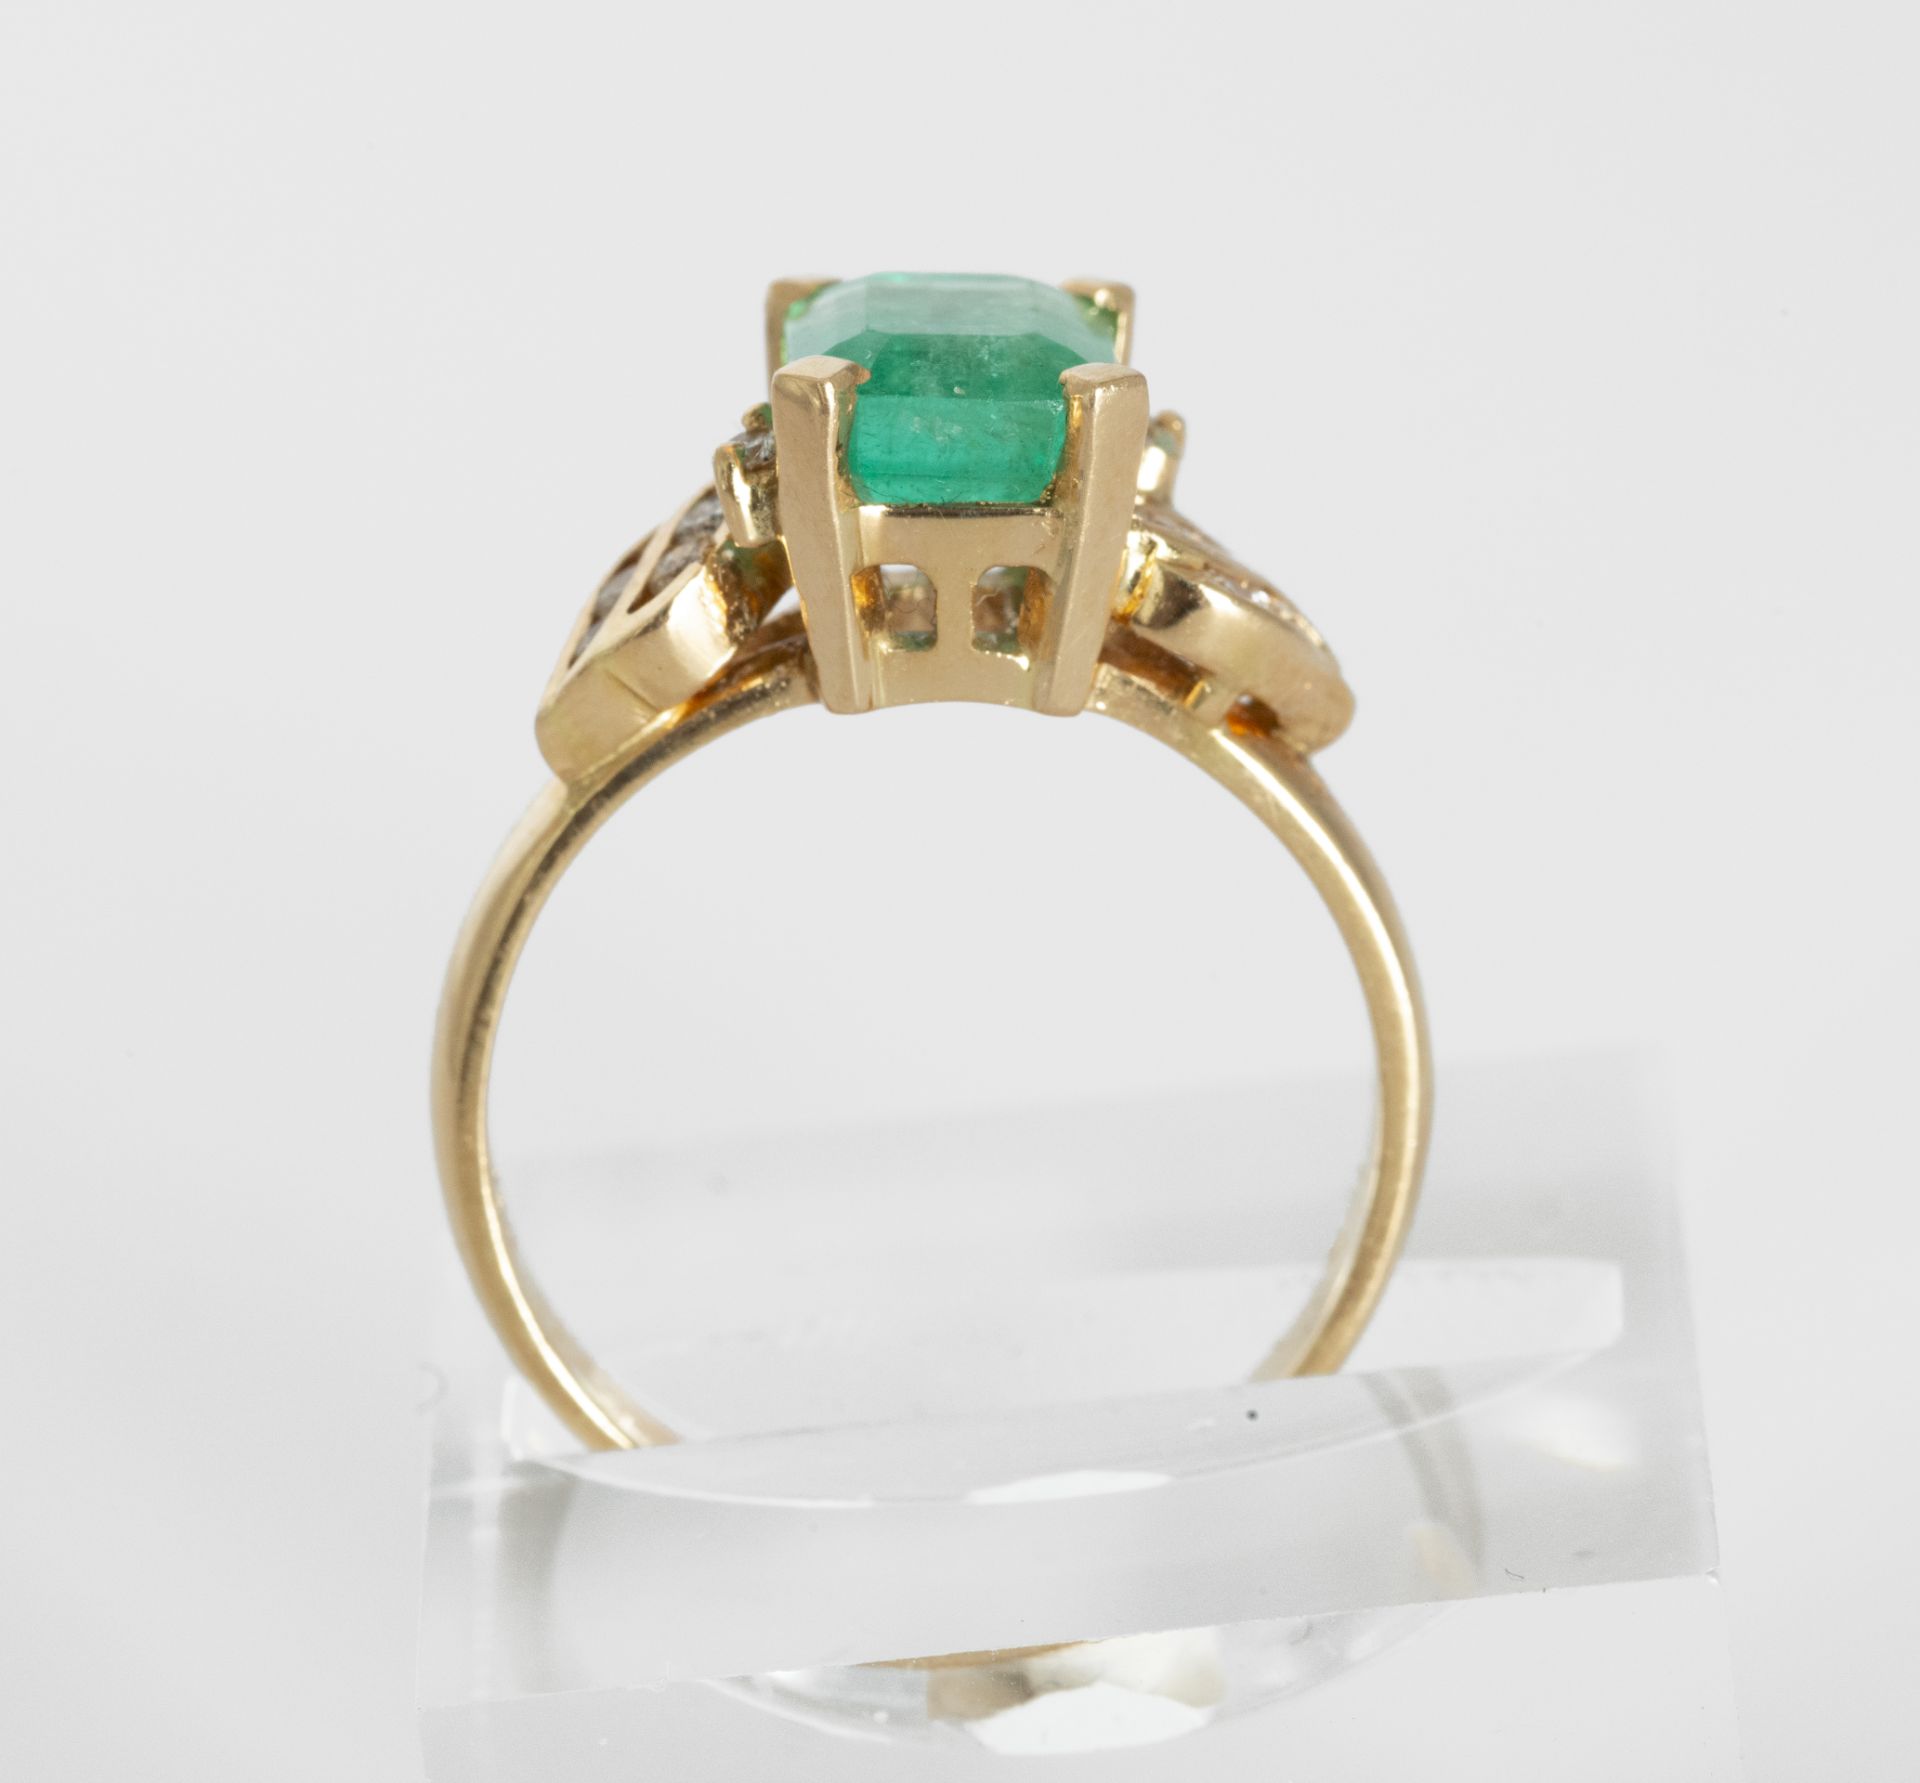 18kt gold emerald and diamond ring. - Image 2 of 4